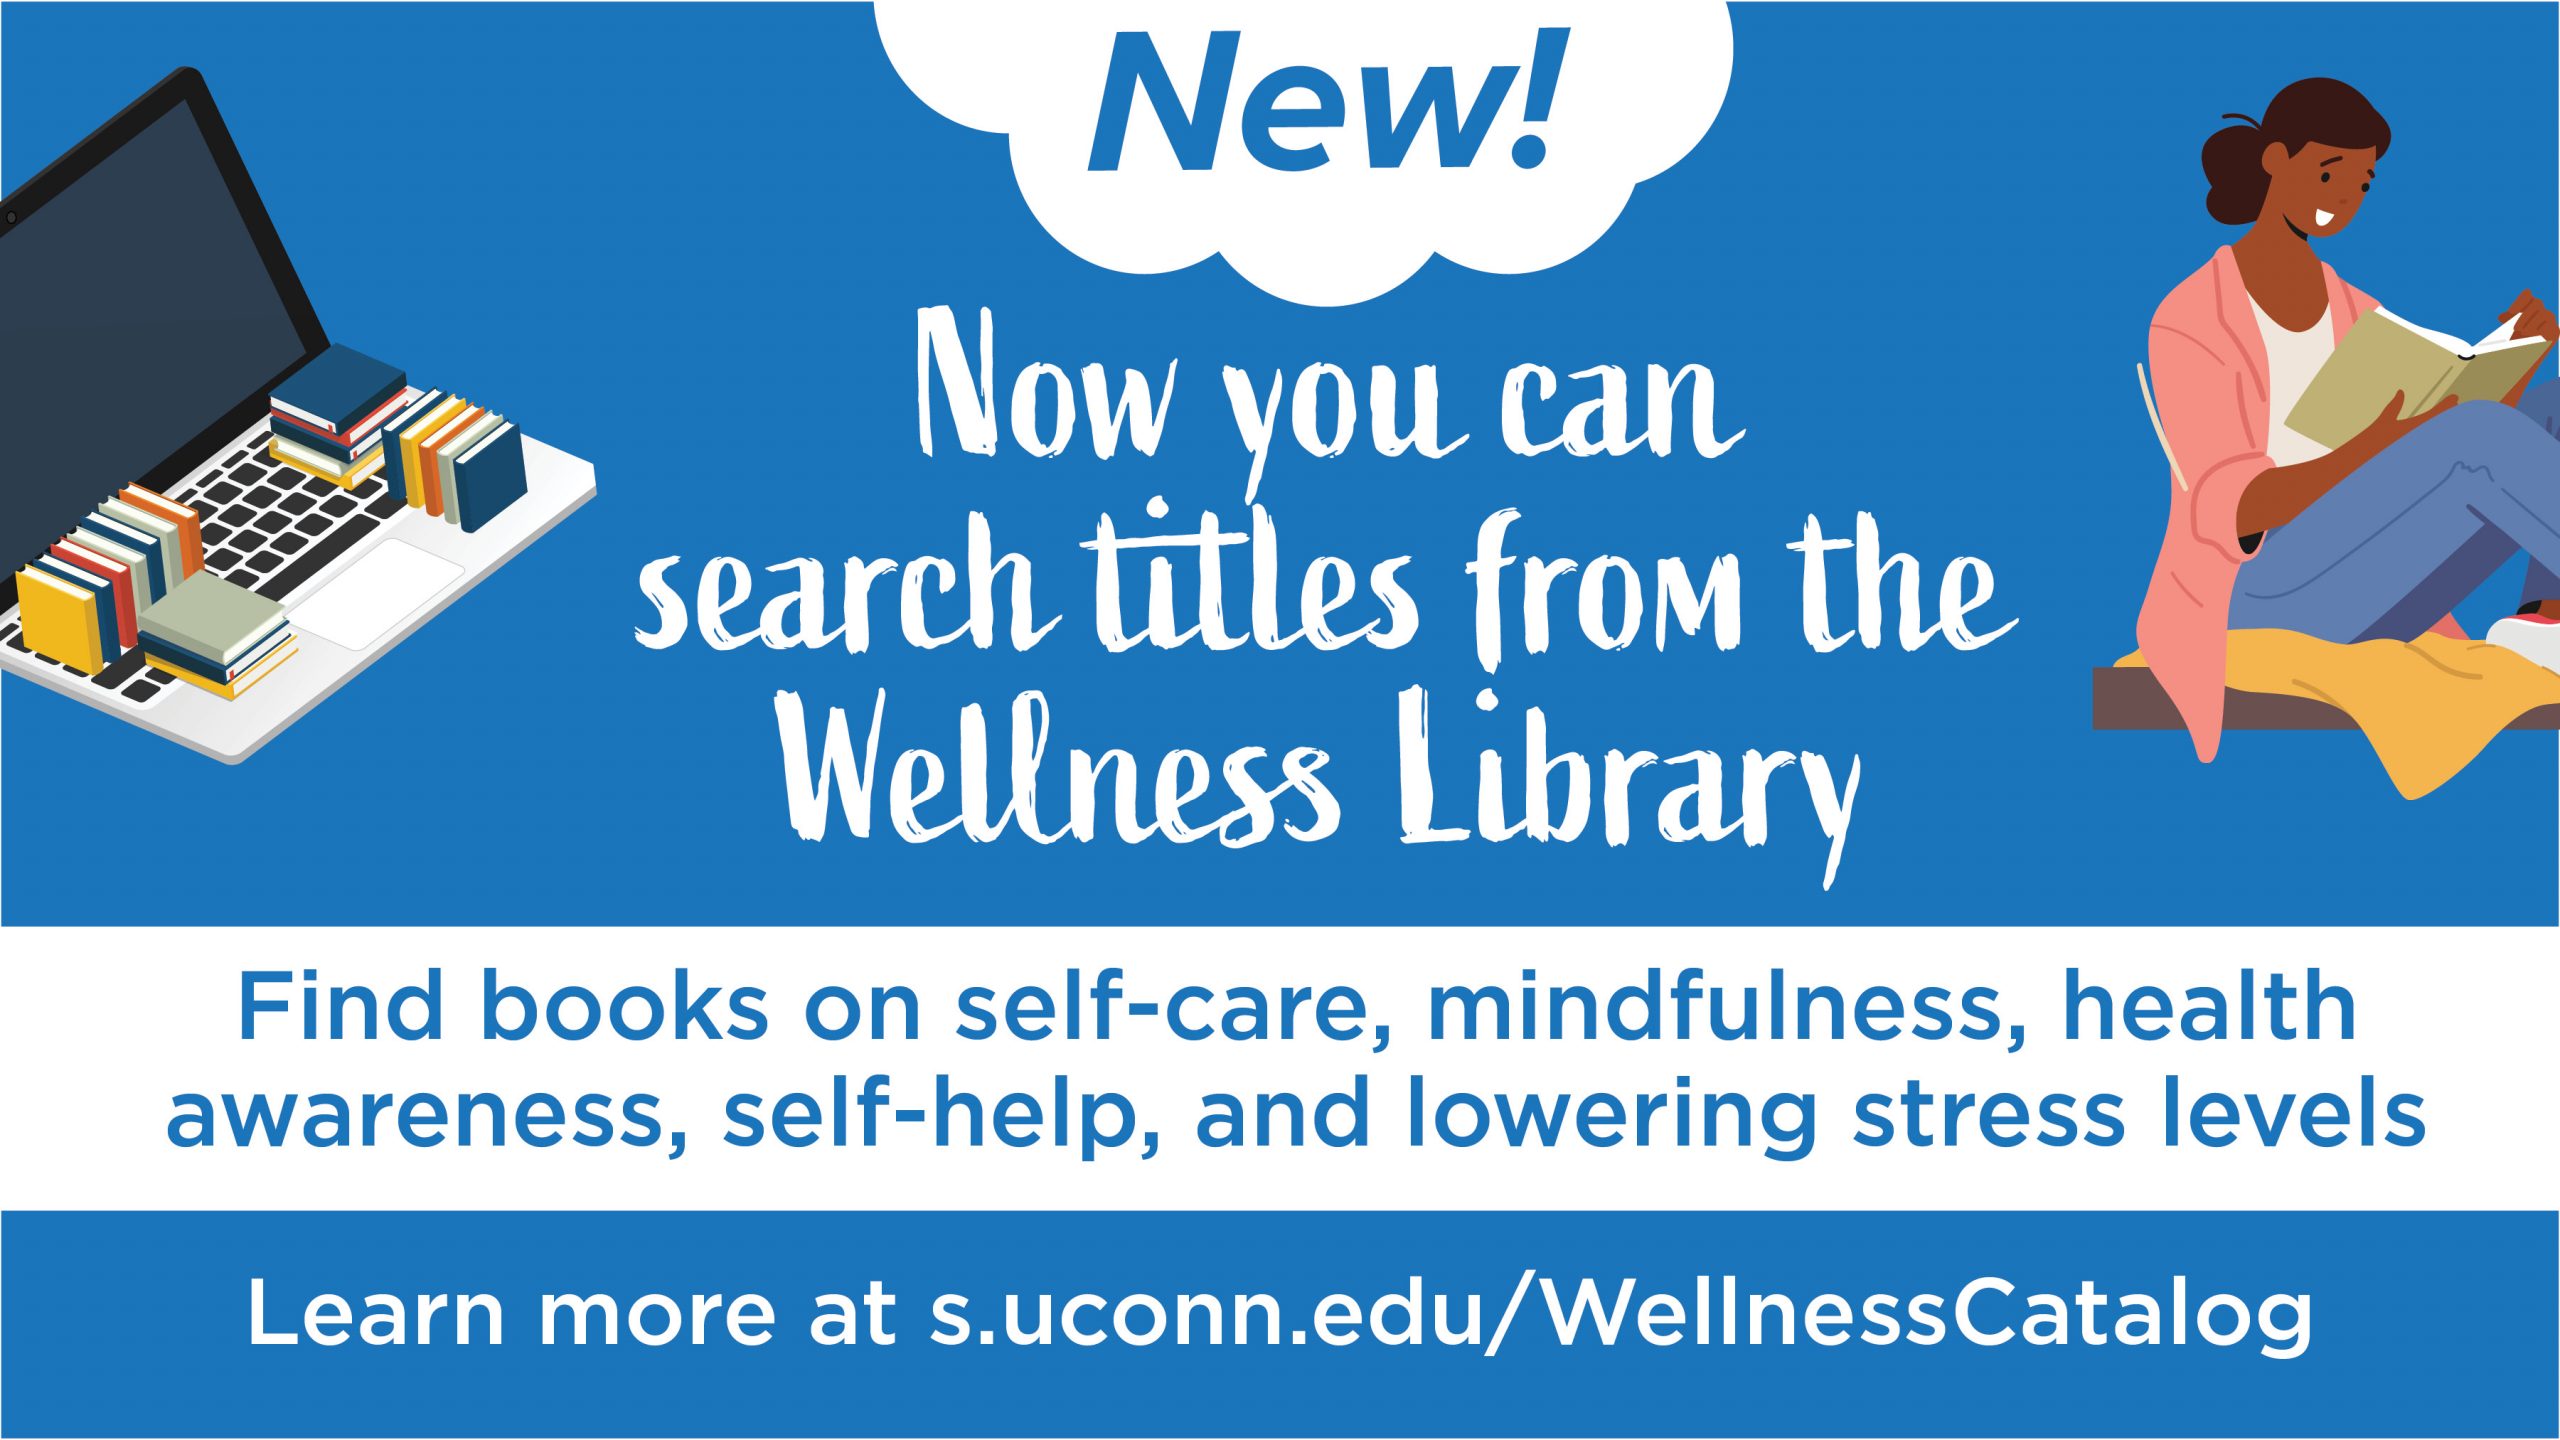 Marketing image with graphics of a laptop and a seated person reading a book with the text: New! Now you can search titles from the wellness library. Find books on self-care, mindfulness, health awareness, self-help, and lowering stress levels. Learn more at s.uconn.edu/WellnessCatalog